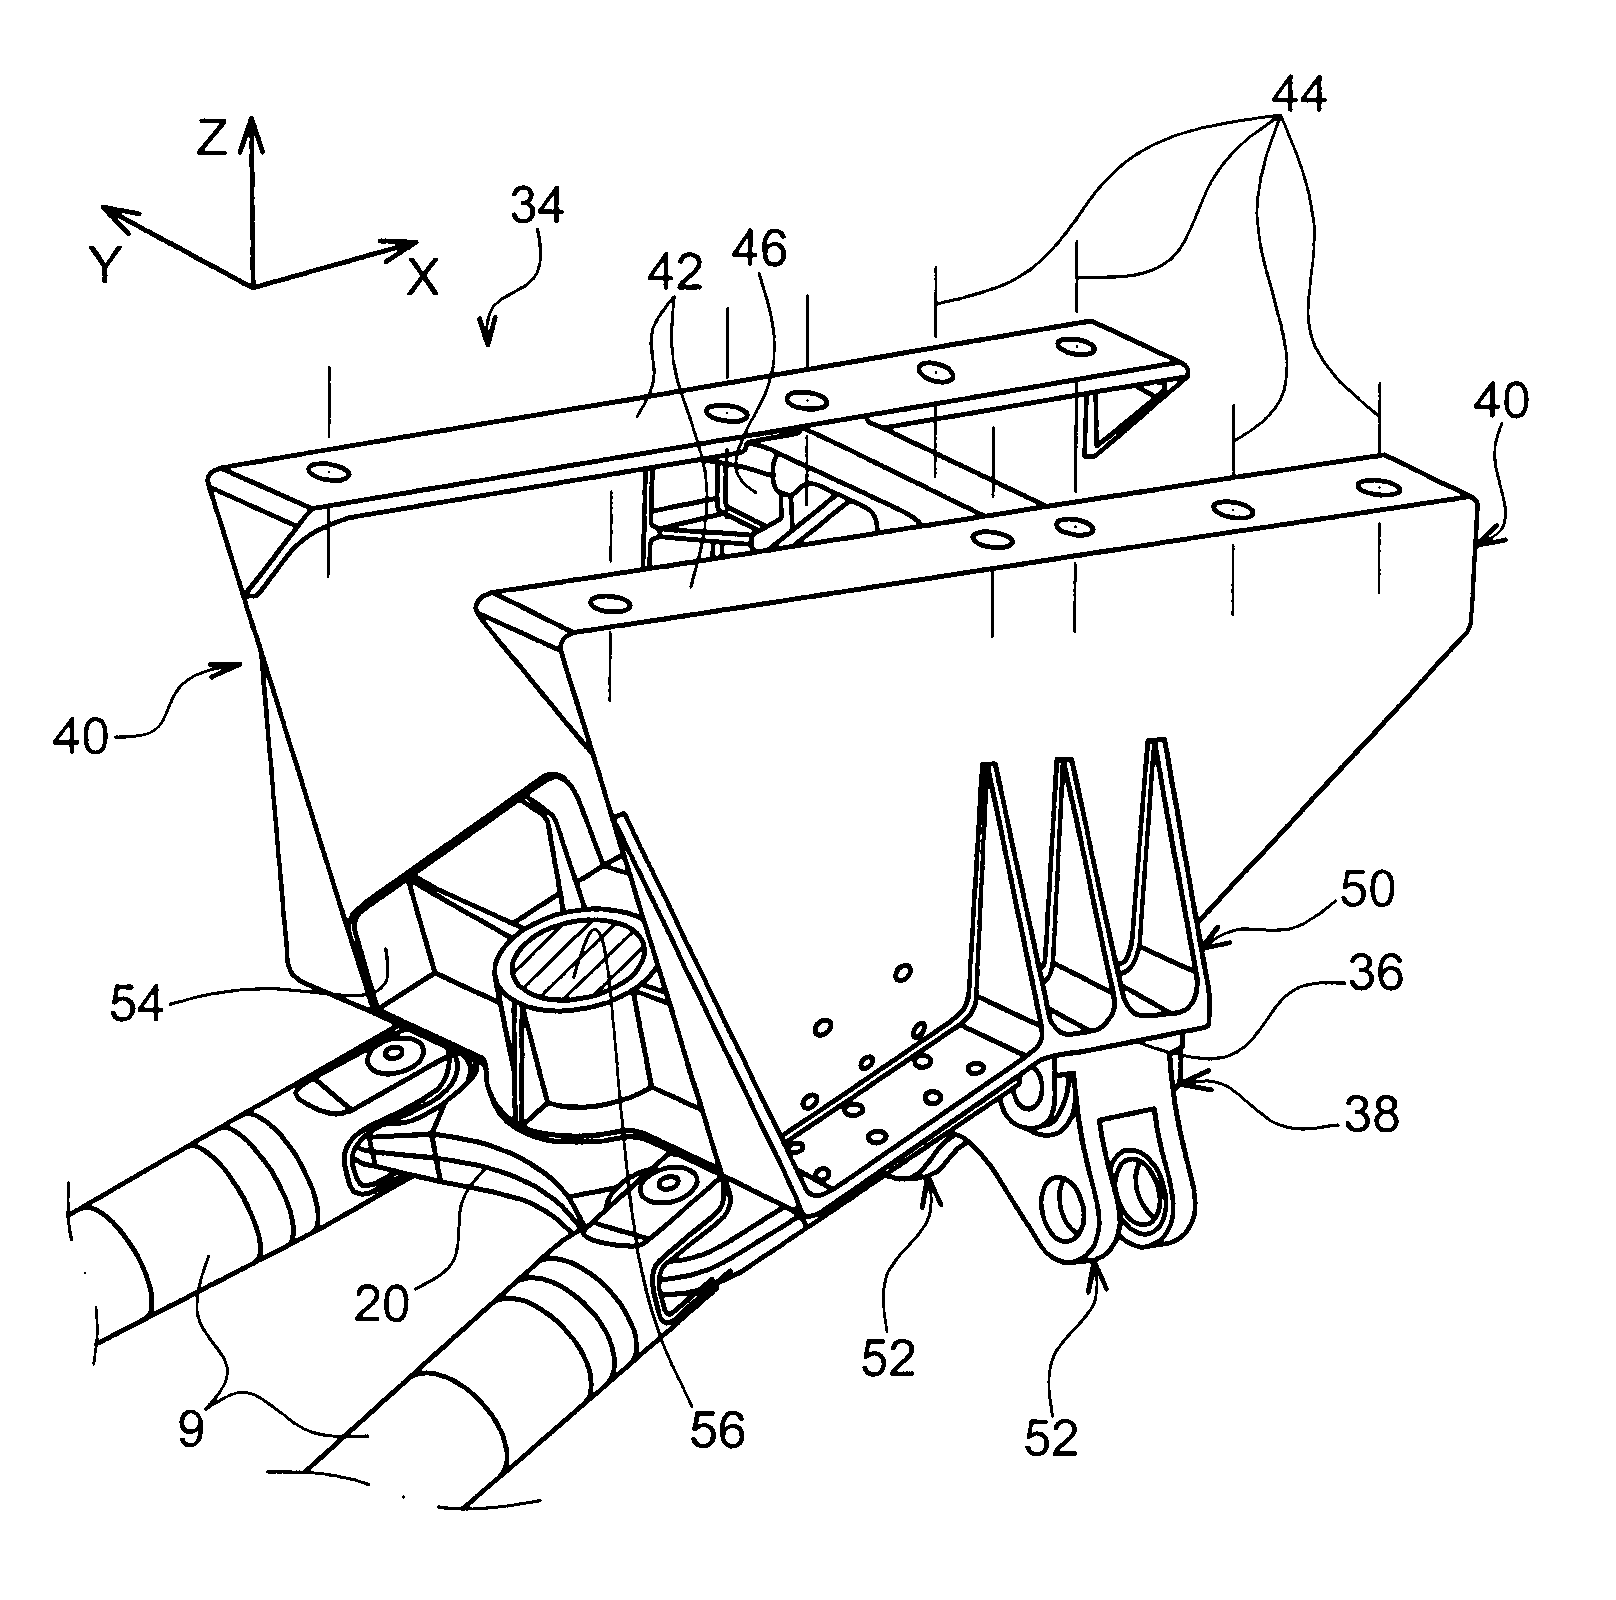 Engine Assembly for an Aircraft Comprising an Engine as Well as an Engine Mounting Stucture